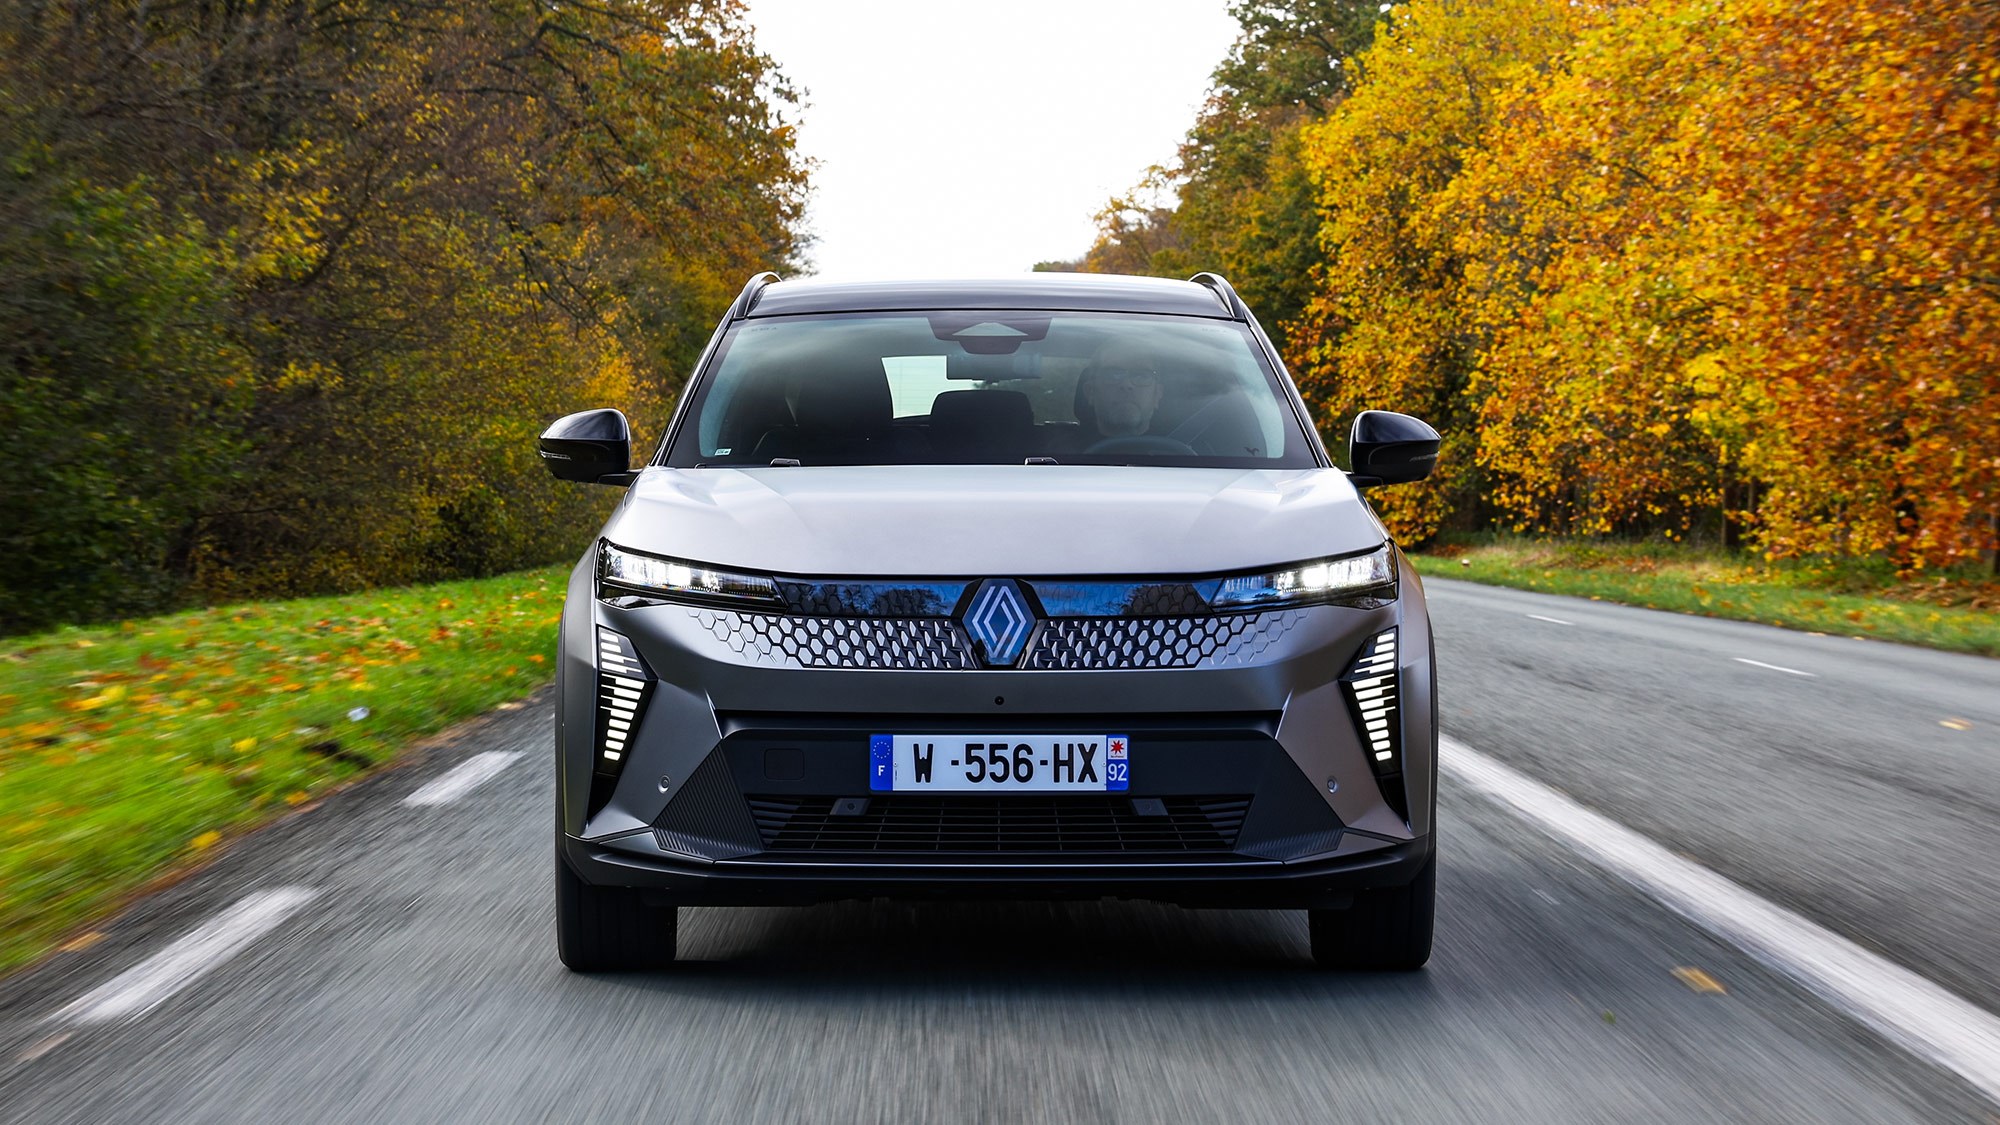 The All-new Renault Scenic E-Tech electric's contribution to a